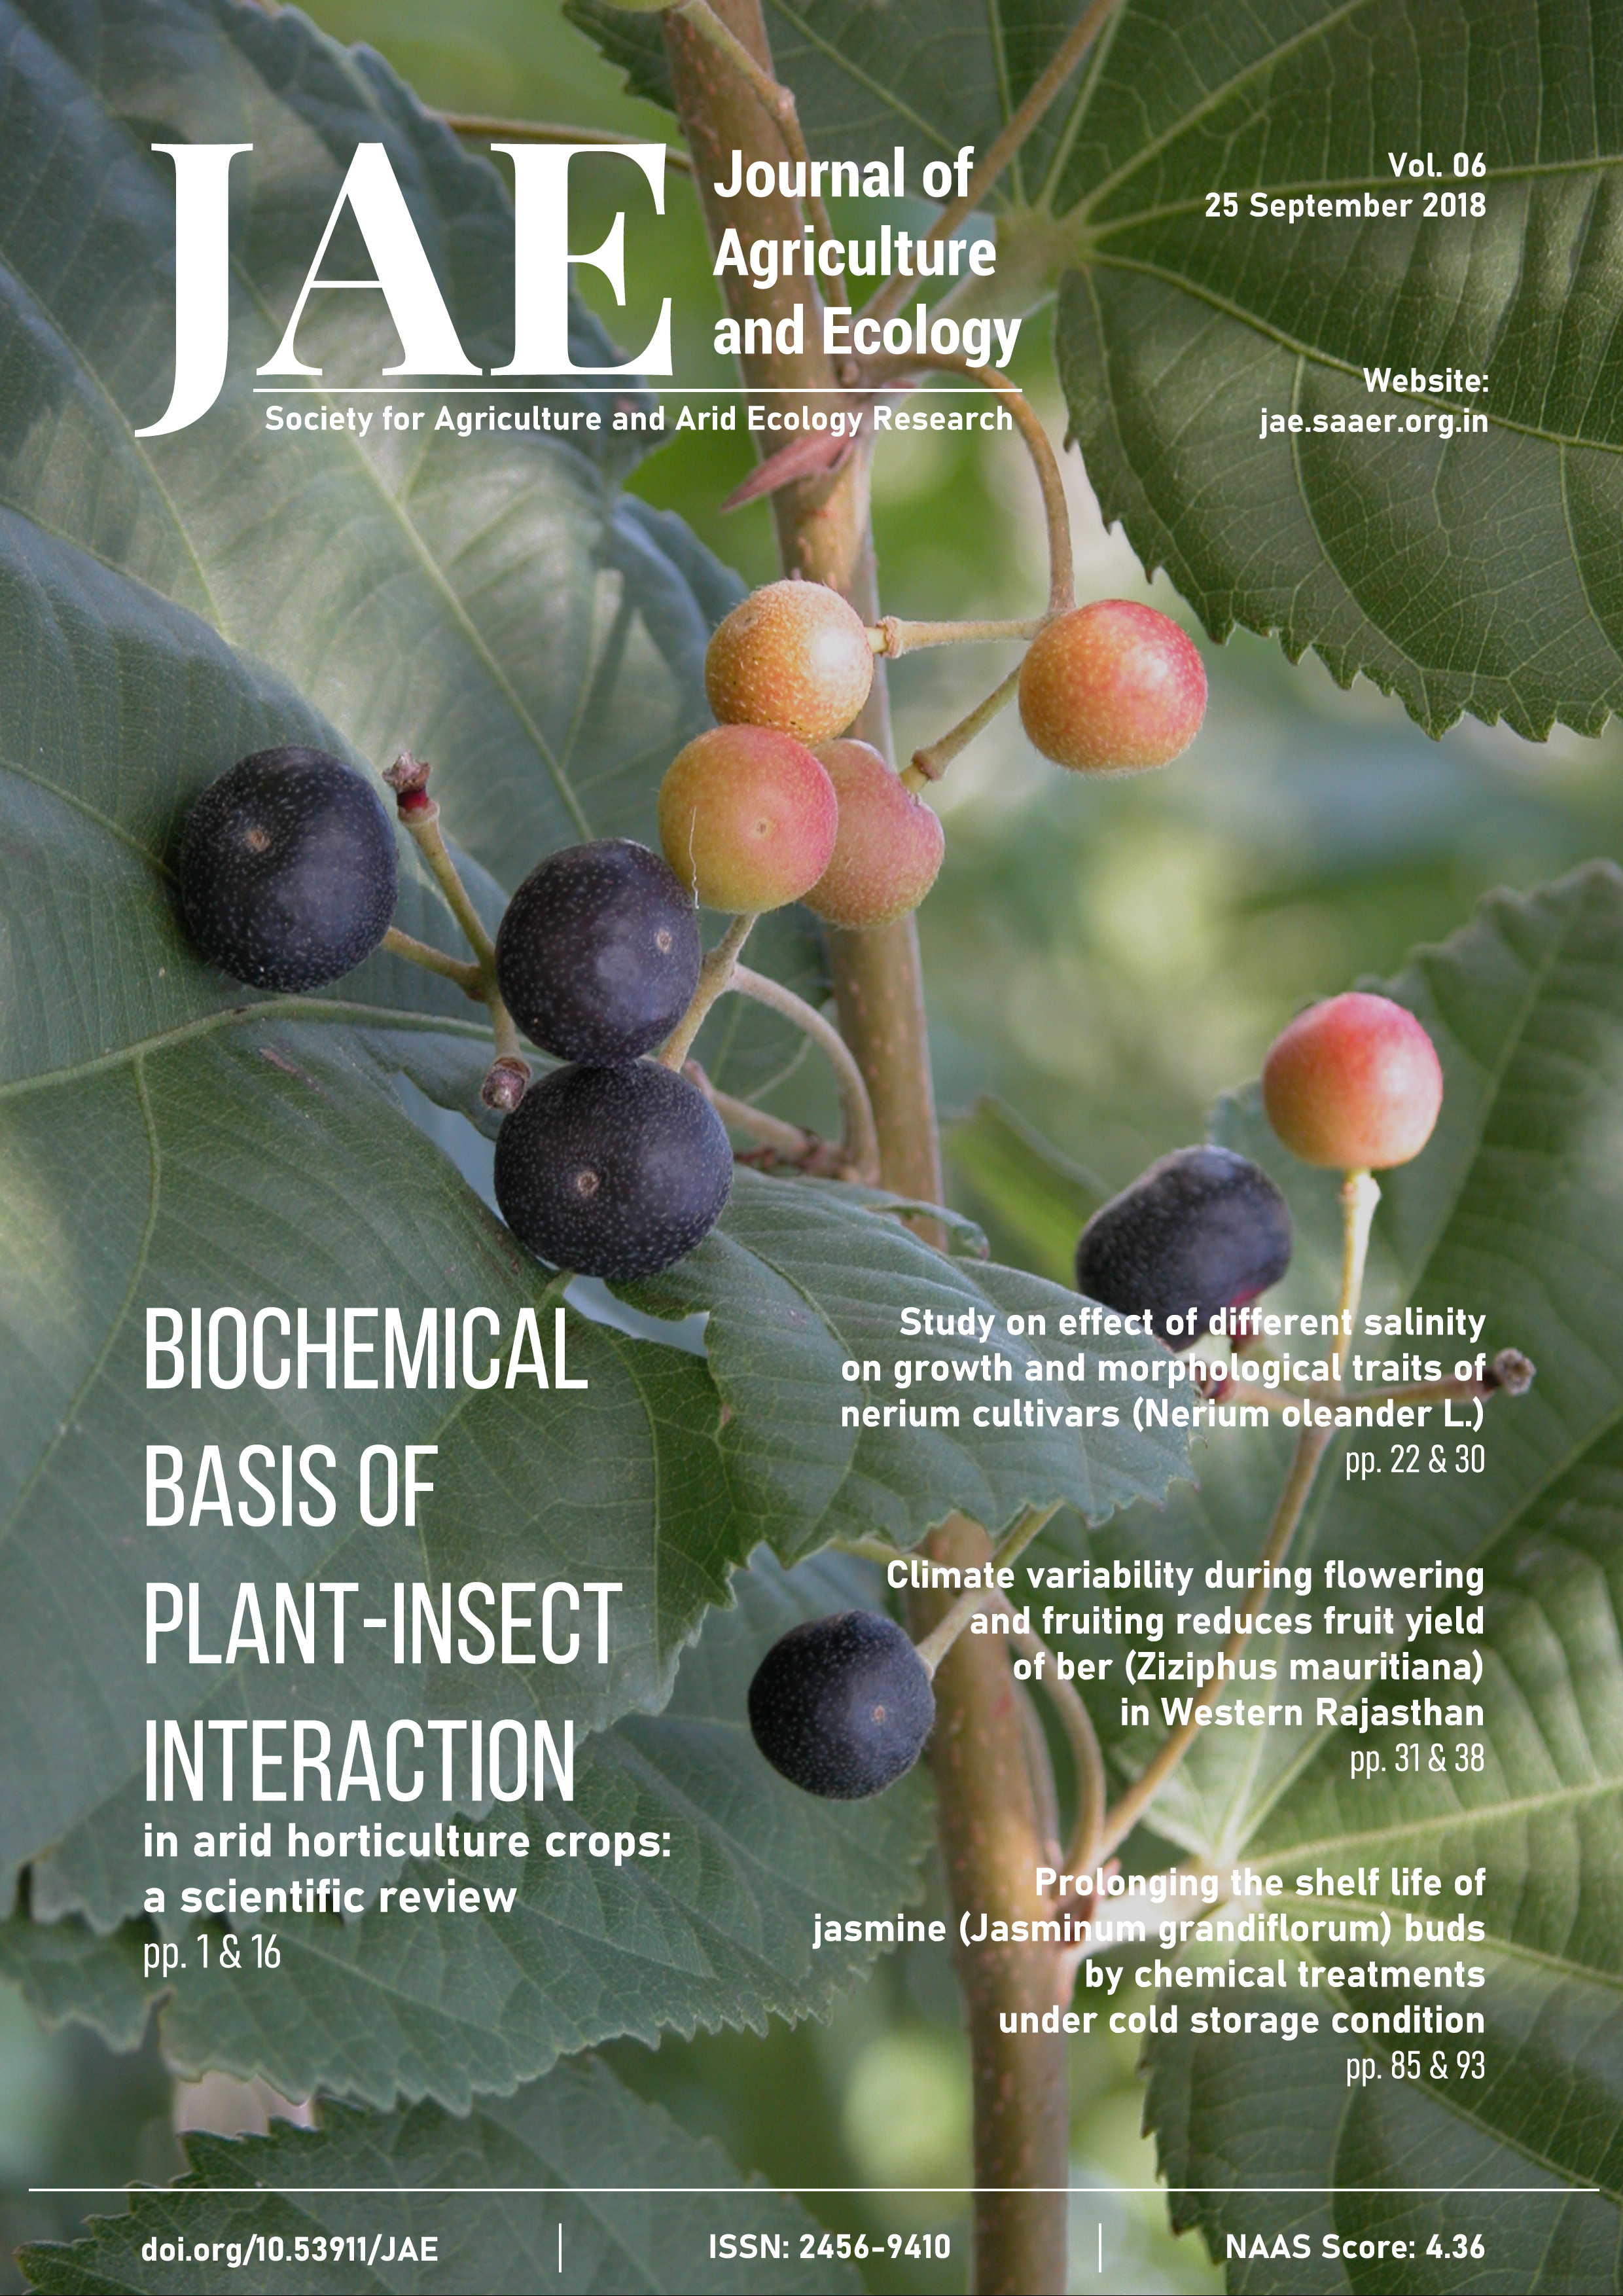 Journal of Agriculture and Ecology Issue 06 Cover